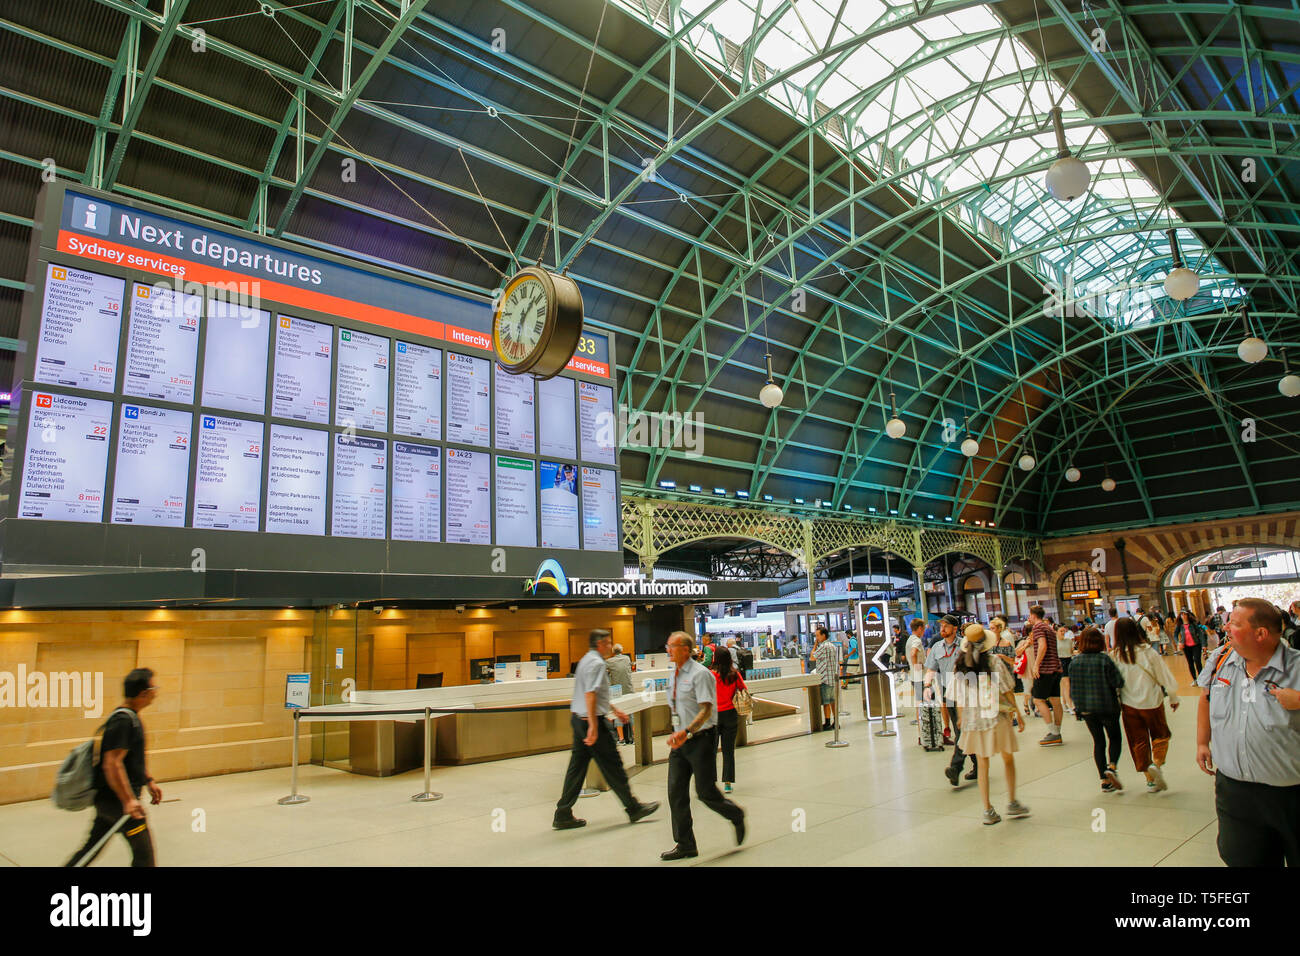 Interior of Central railway station in Sydney, with transport information board and customer help services,Sydney,Australia Stock Photo